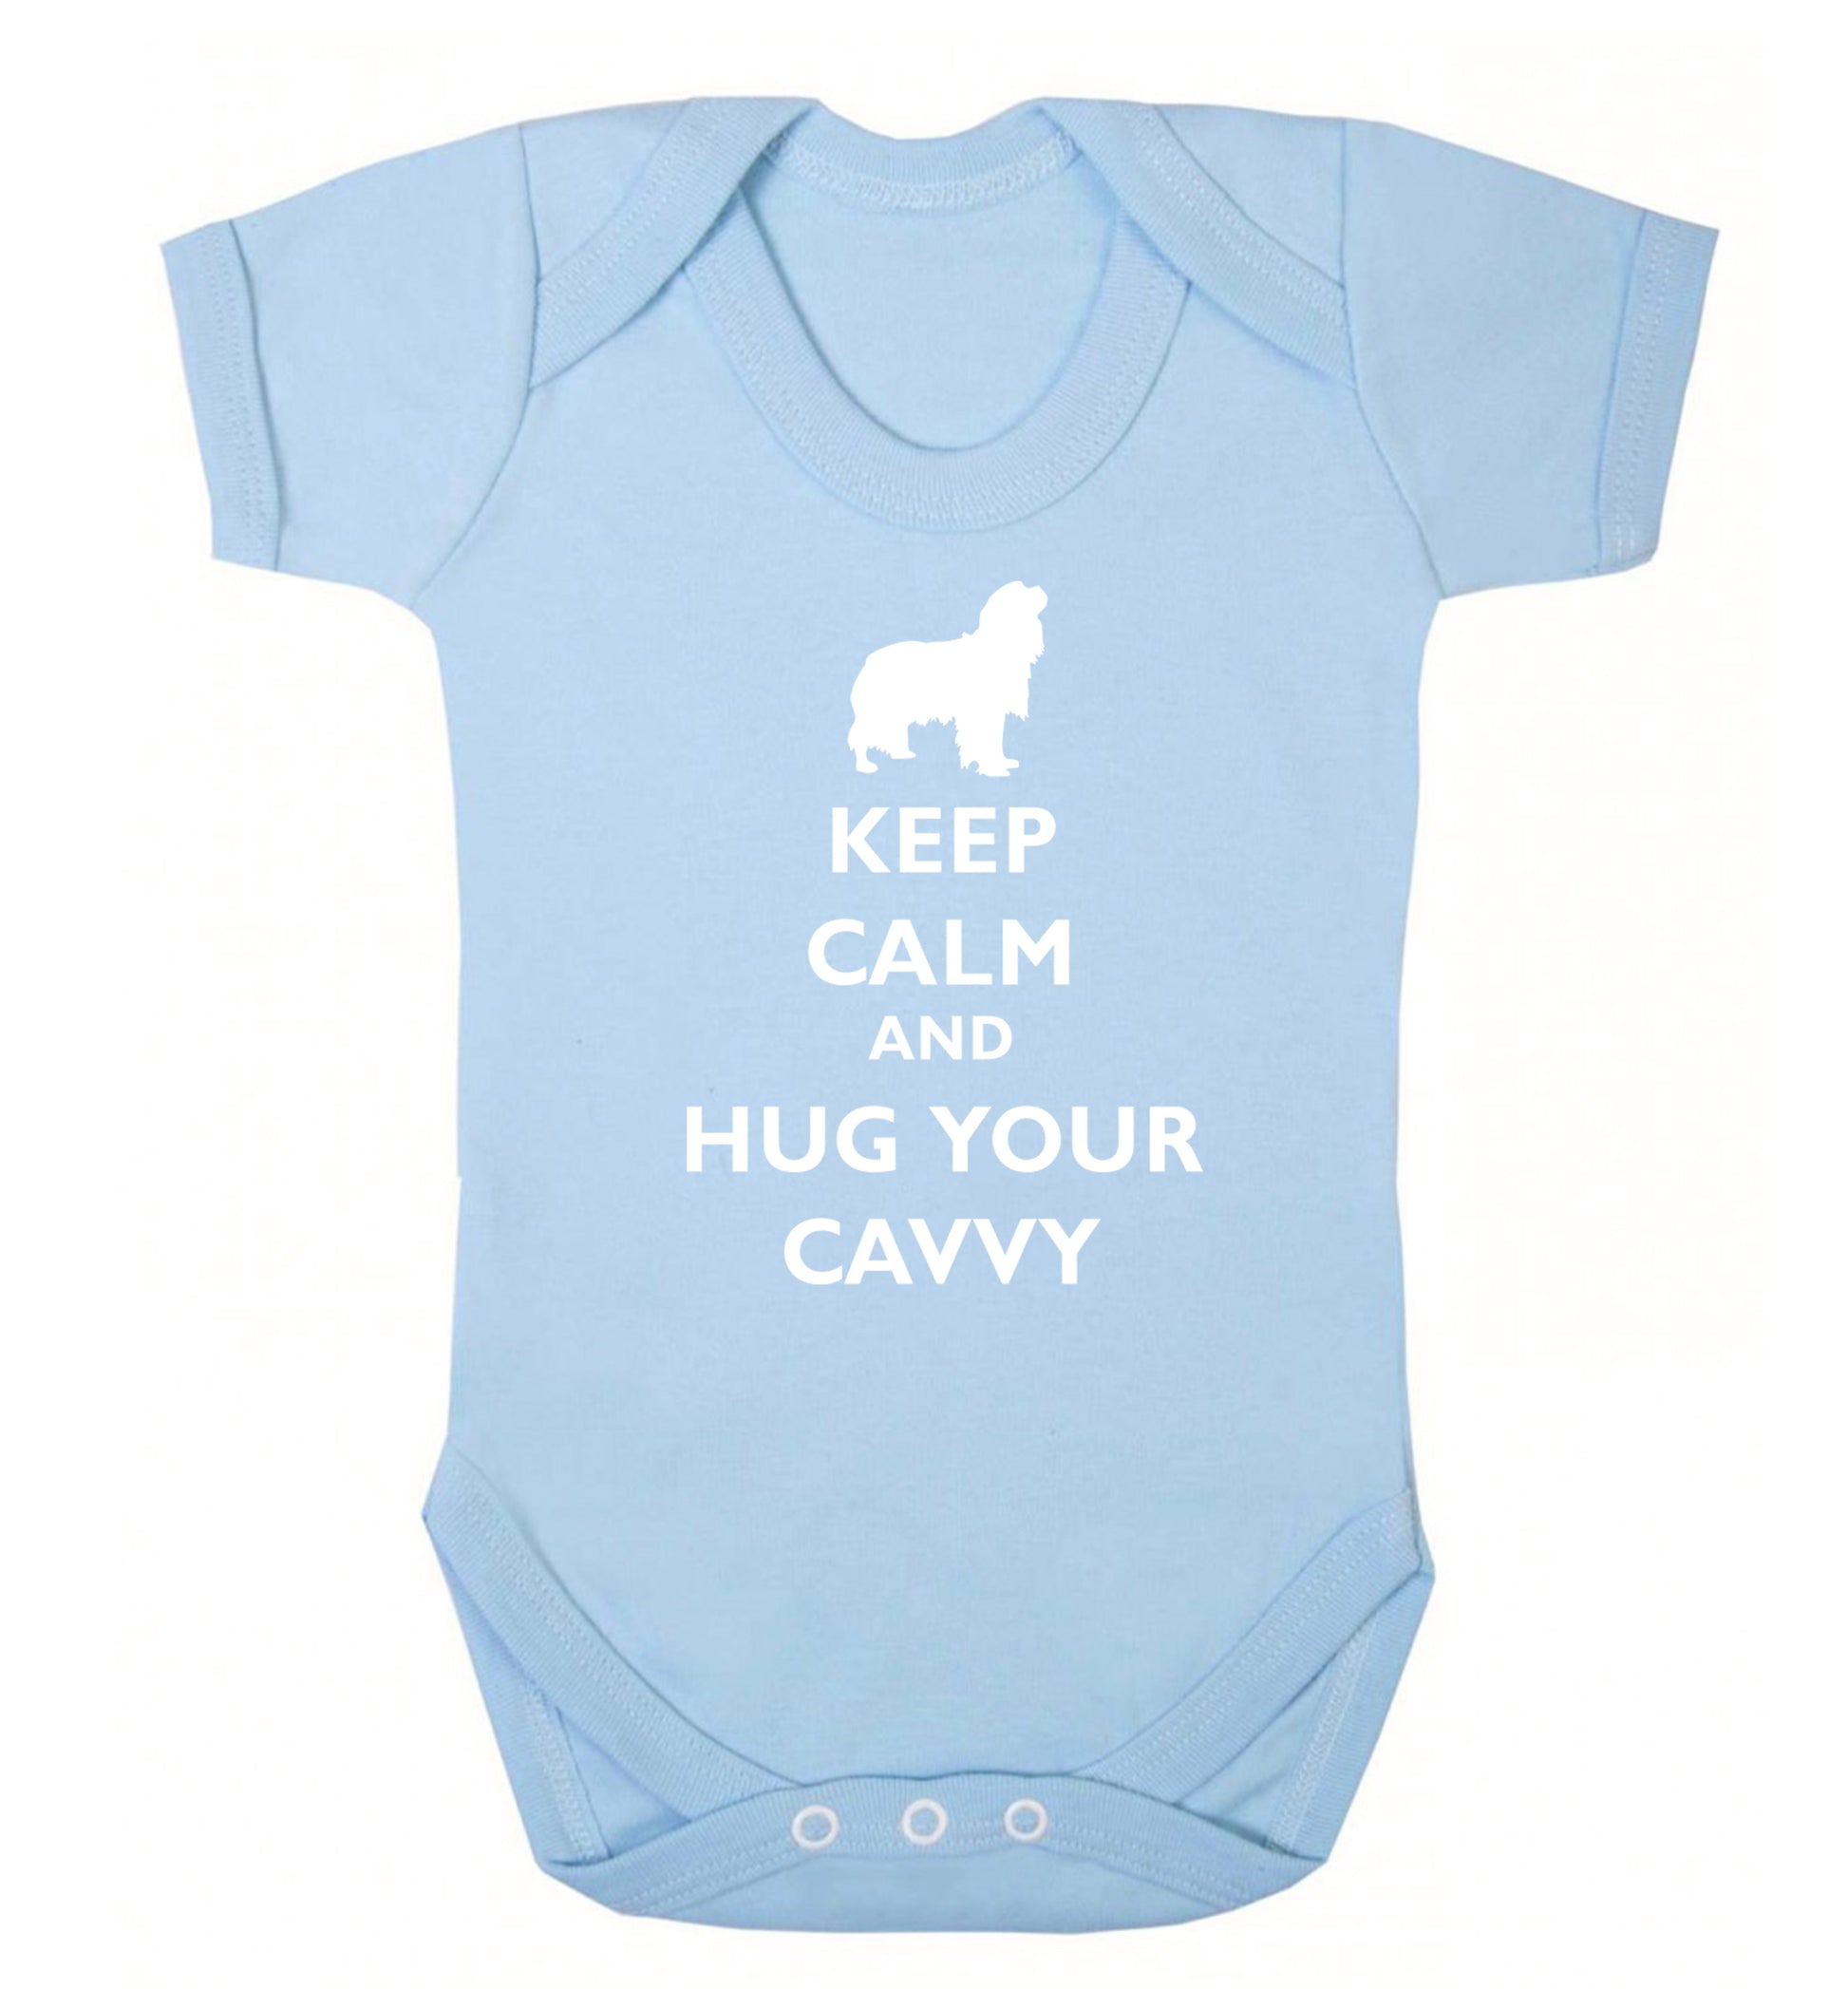 Keep calm and hug your cavvy Baby Vest pale blue 18-24 months